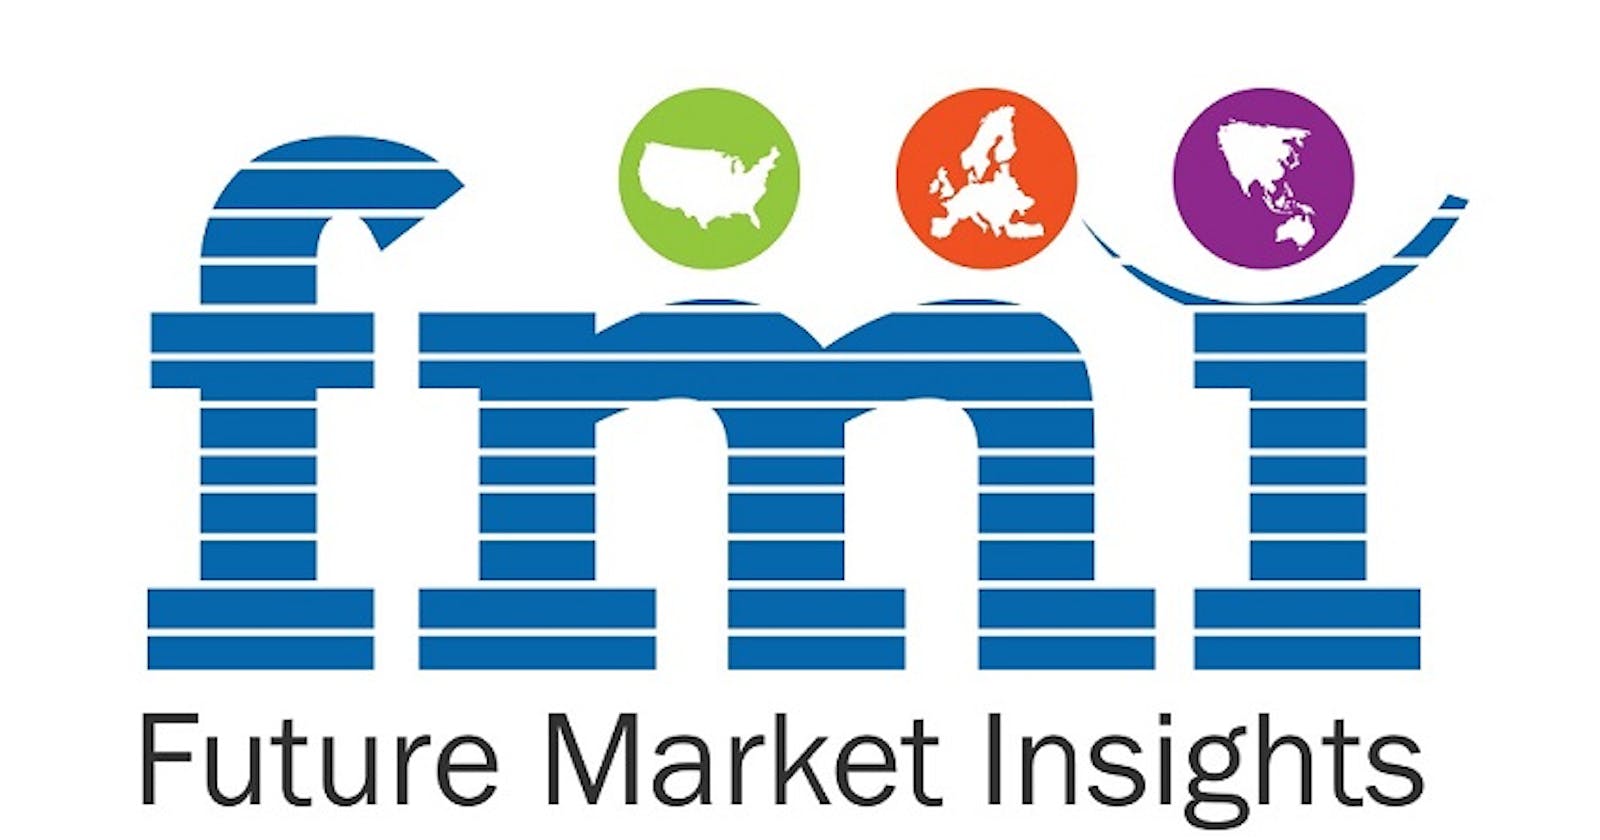 Intracardiac Imaging Market 2022 : Industry Trends, Business Insights, Size, Segments and Forecast by 2032